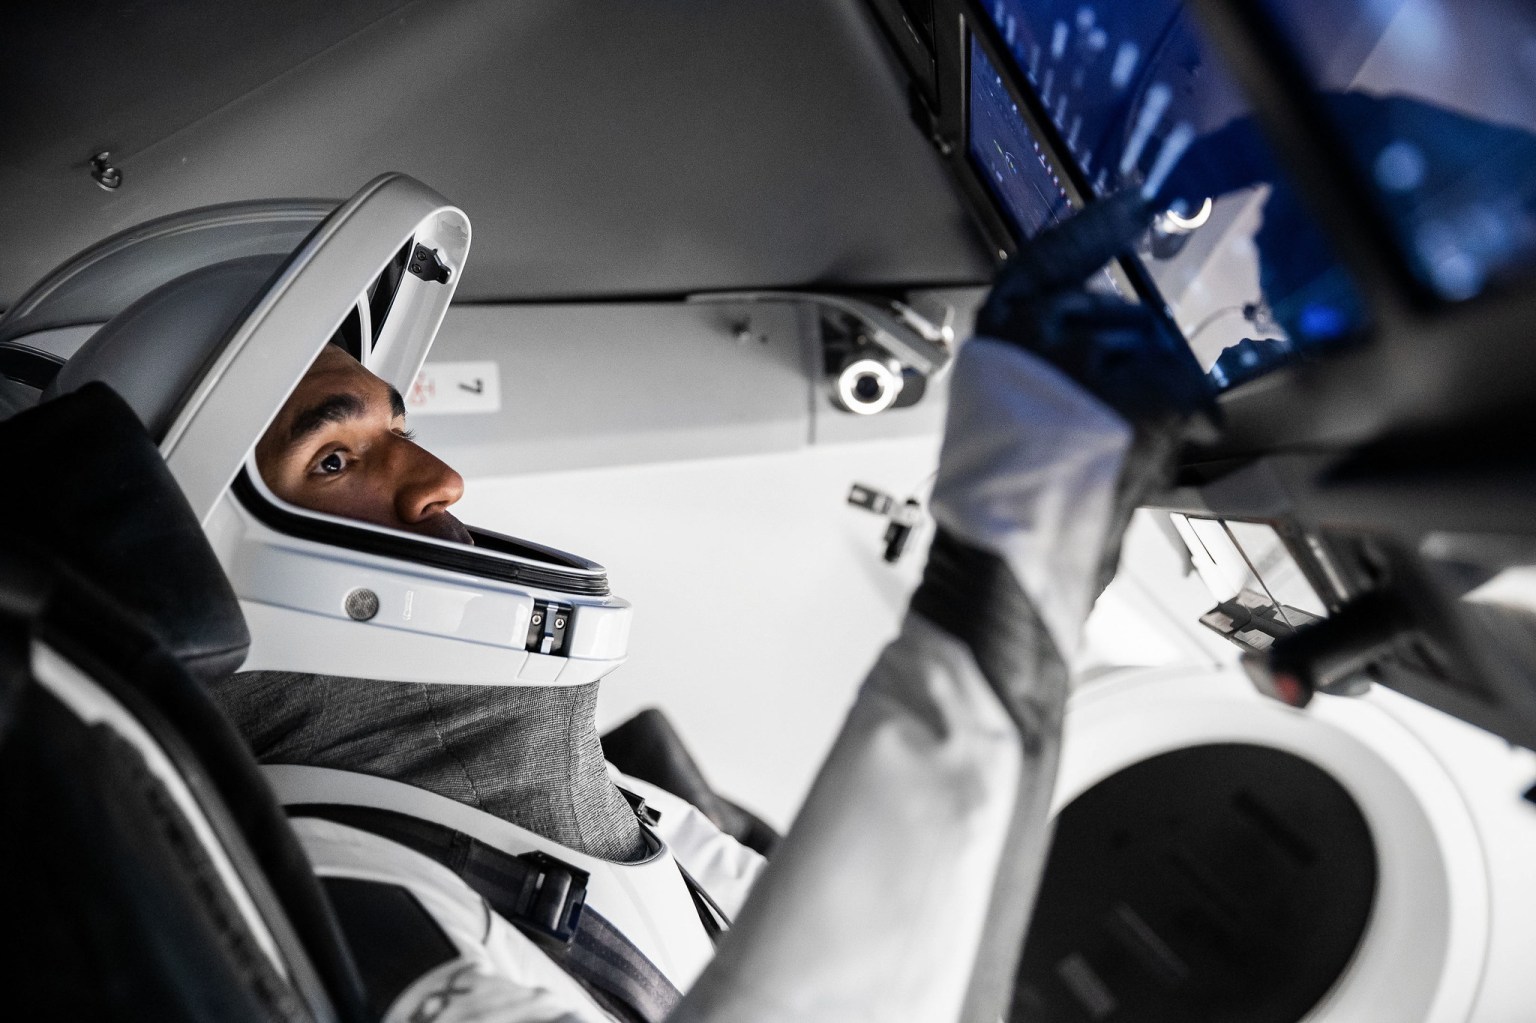 NASA astronaut and SpaceX Crew-3 Commander Raja Chari is pictured in his spacesuit during a training session at SpaceX headquarters in Hawthorns, California. 